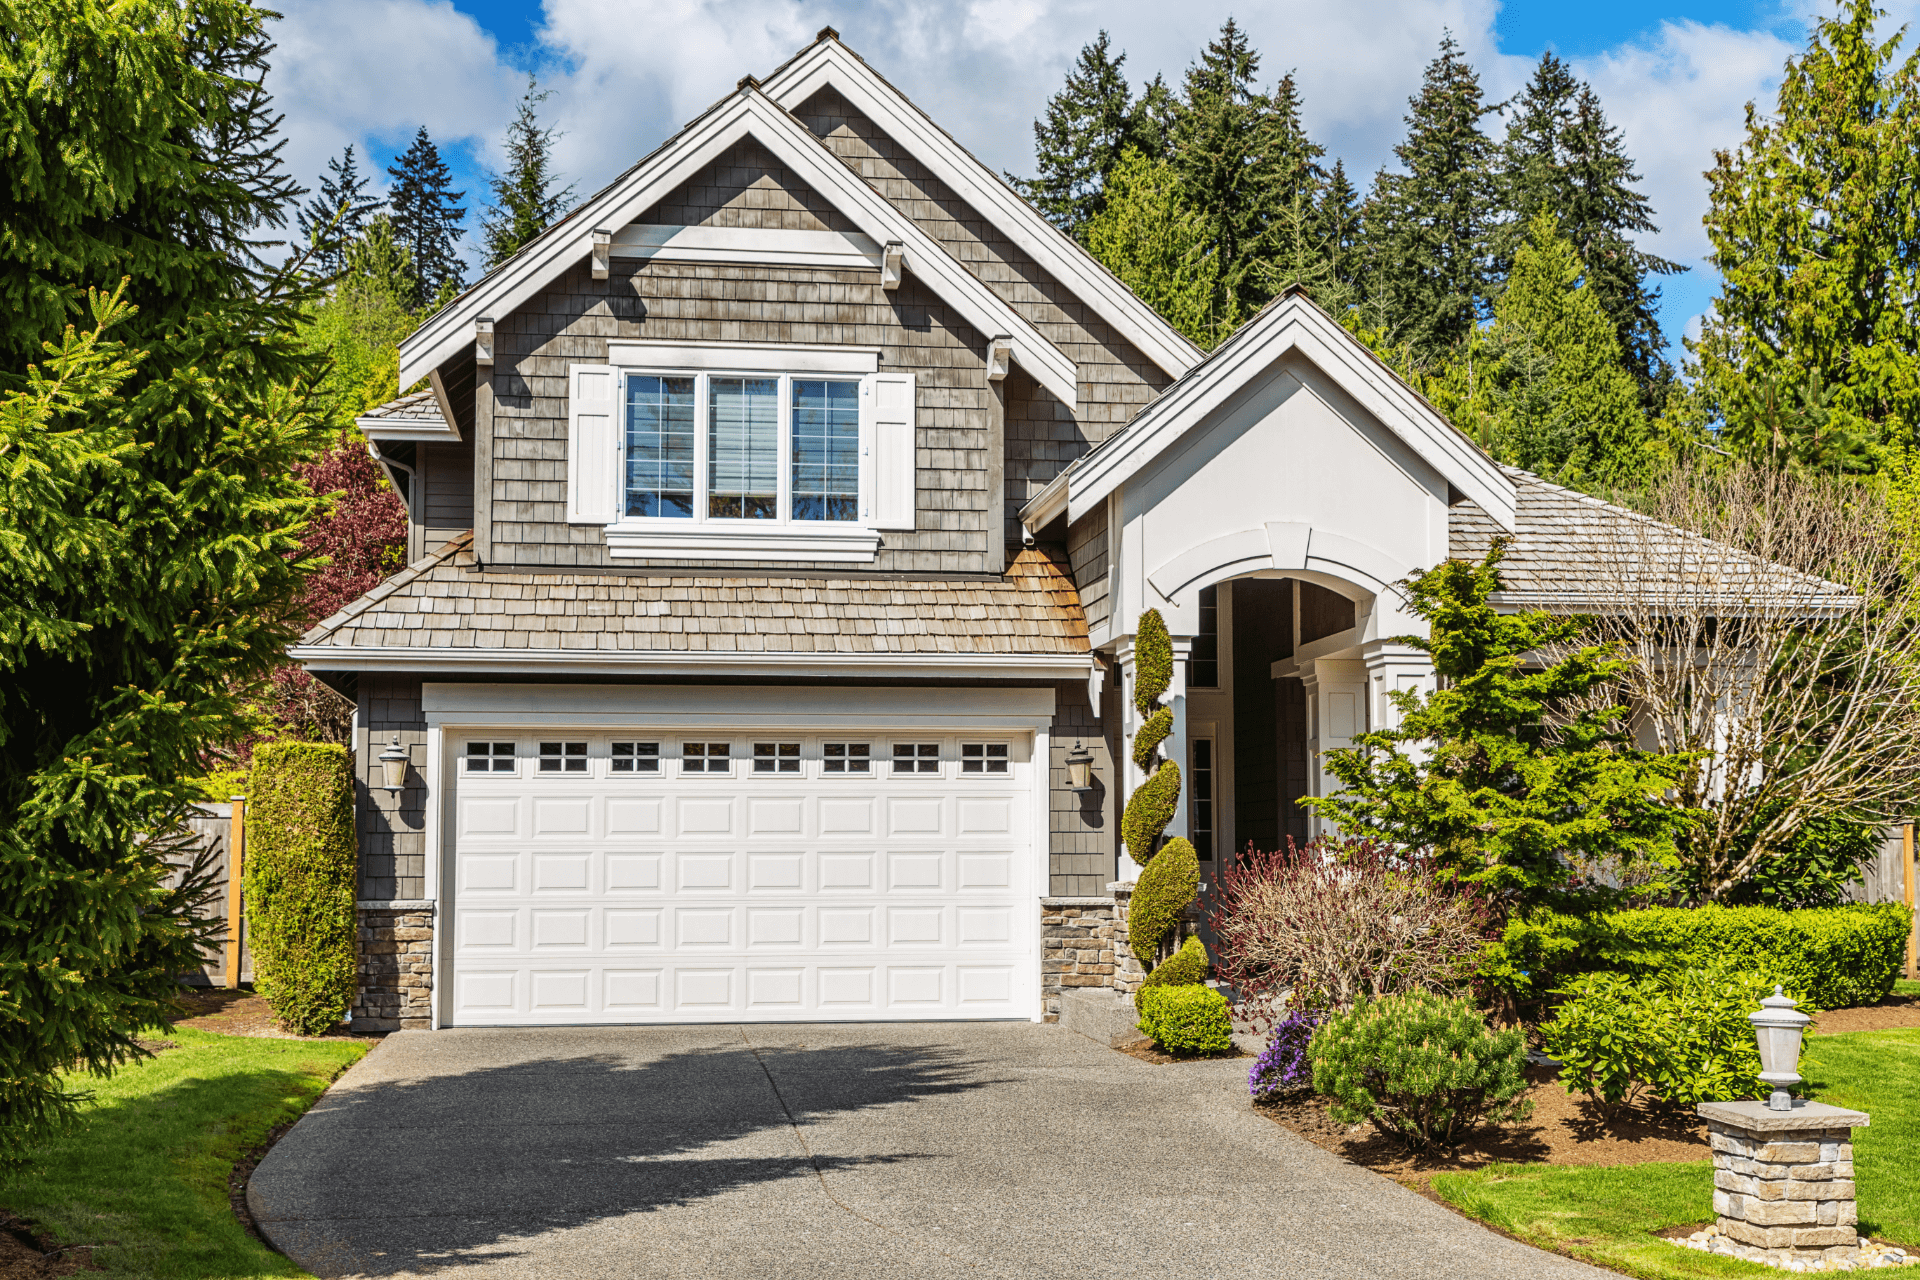 white garage door on rustic two-story home